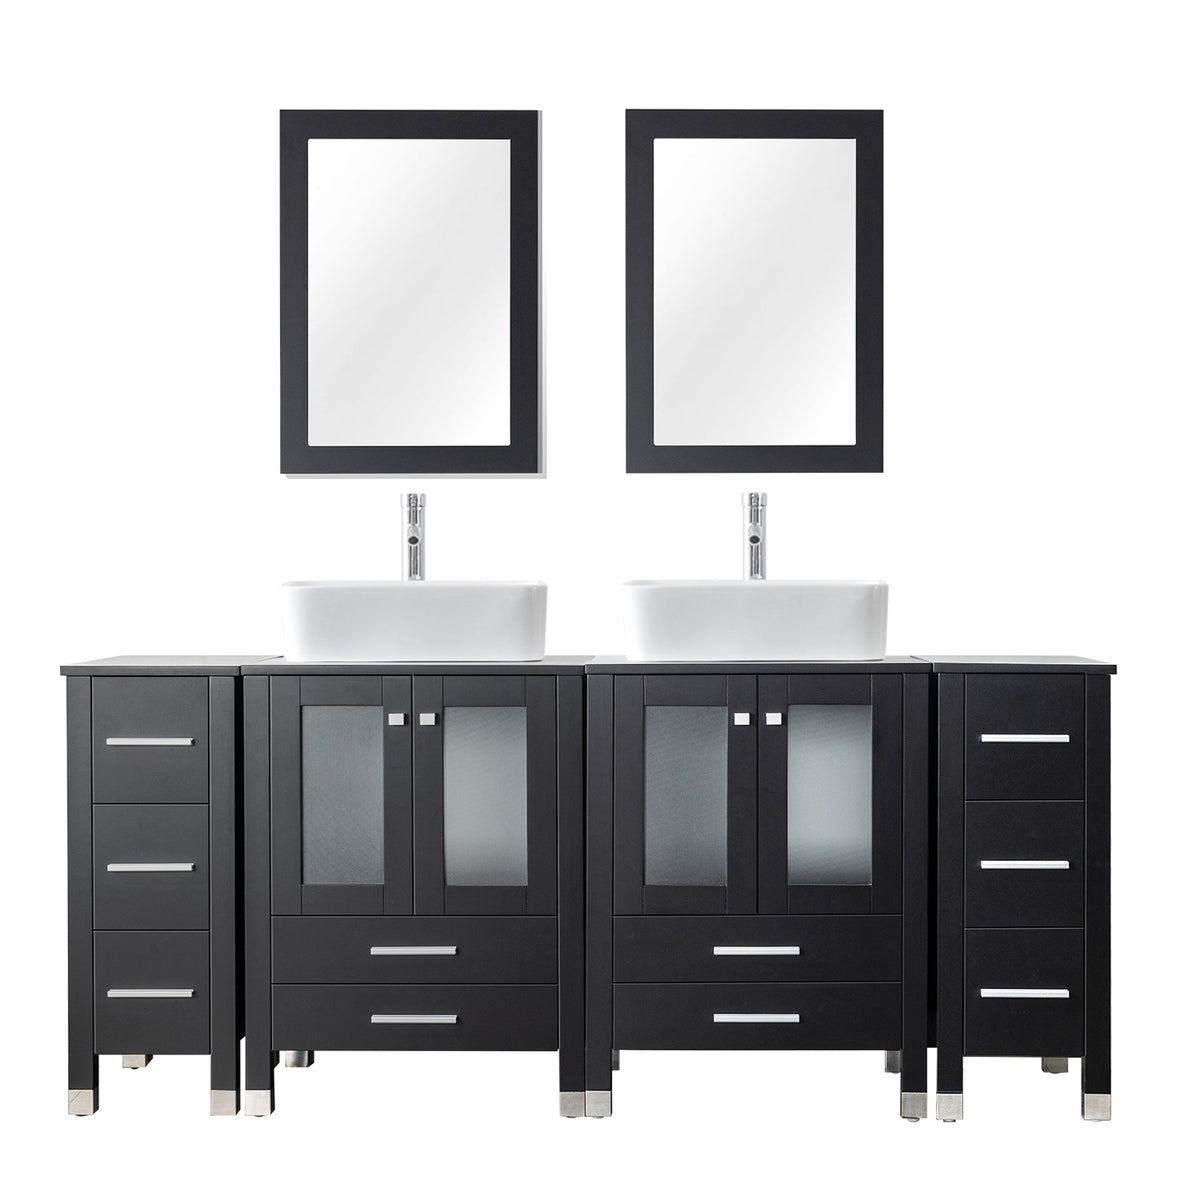 Eclife 72" Double Bathroom Vanity Sink Combos, Solid Wood Construction and Painted Frame - Black